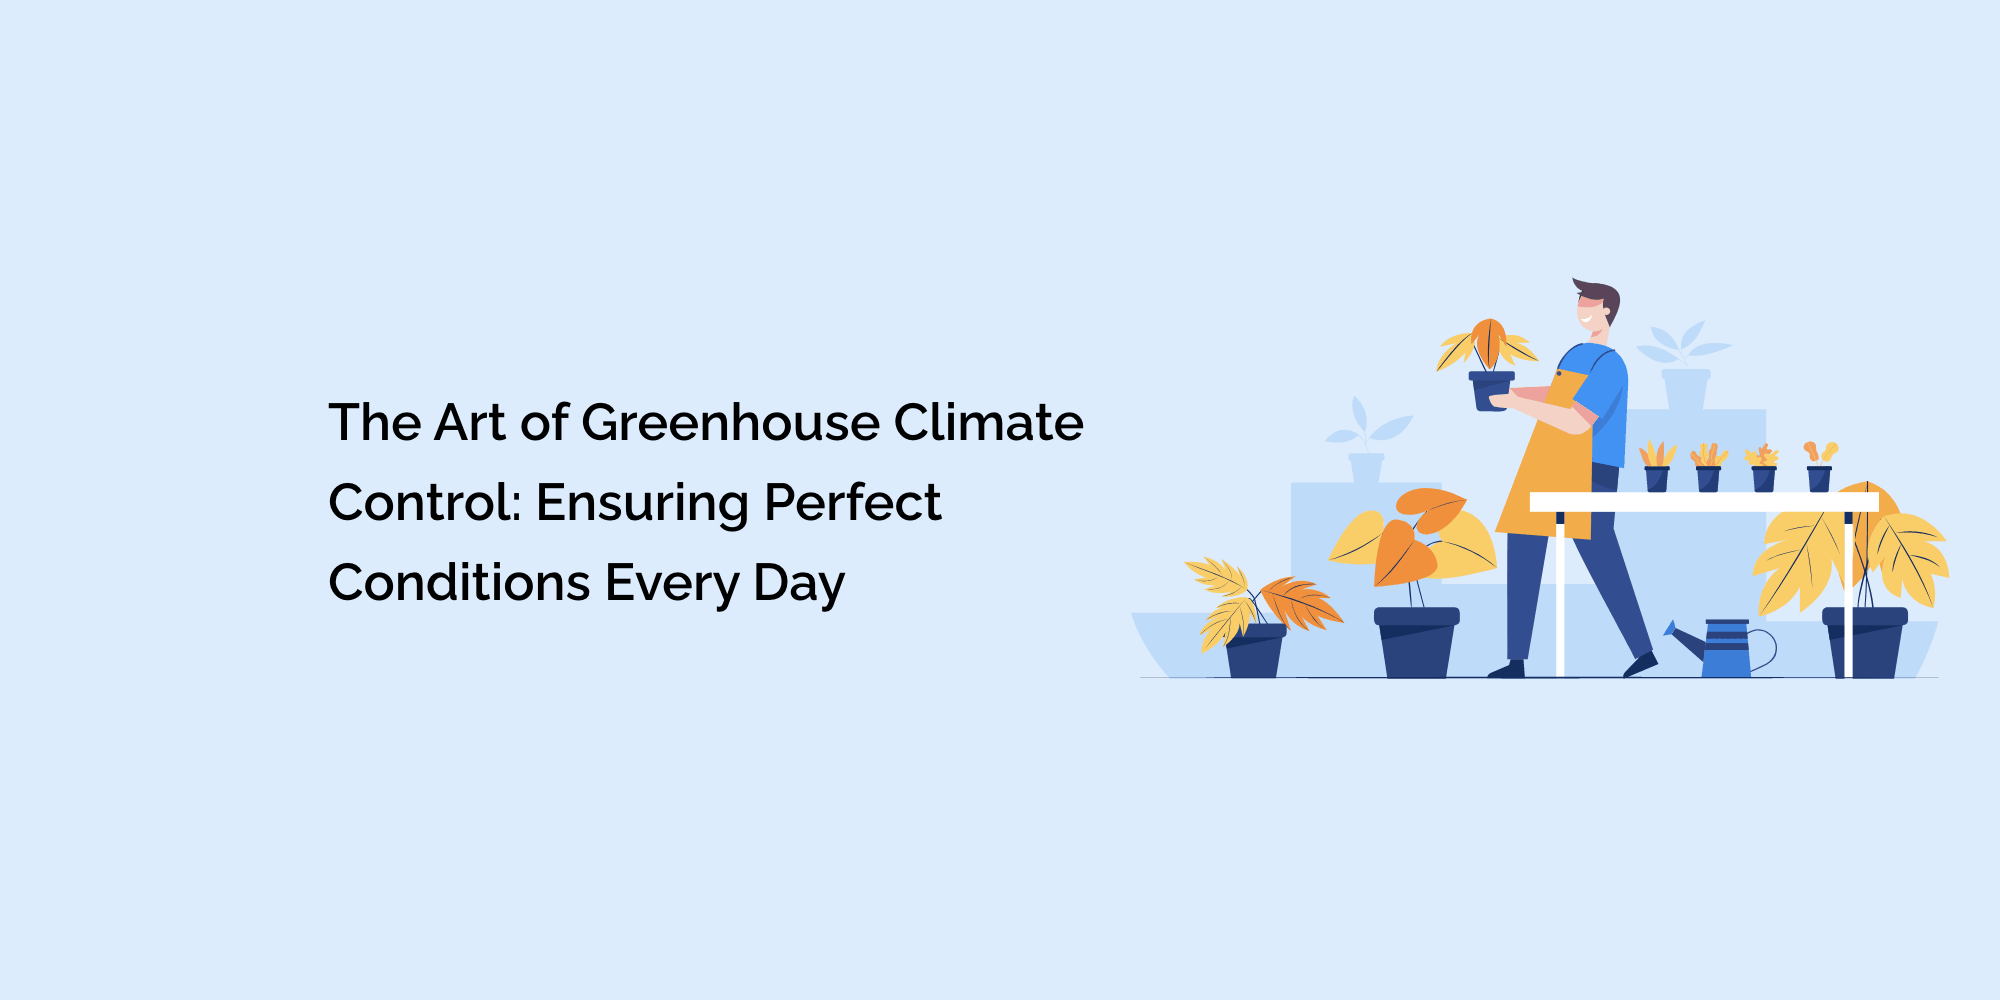 The Art of Greenhouse Climate Control: Ensuring Perfect Conditions Every Day